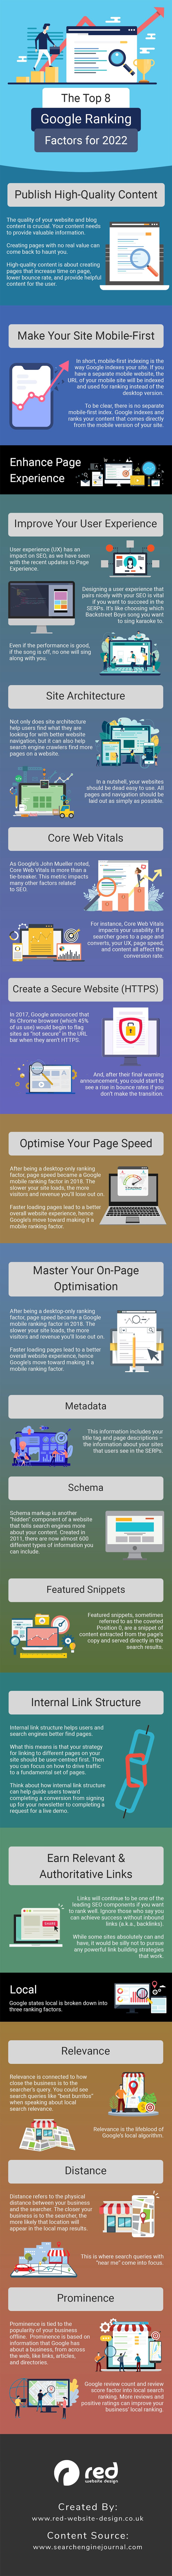 How Does Your Website Rank - Infographic